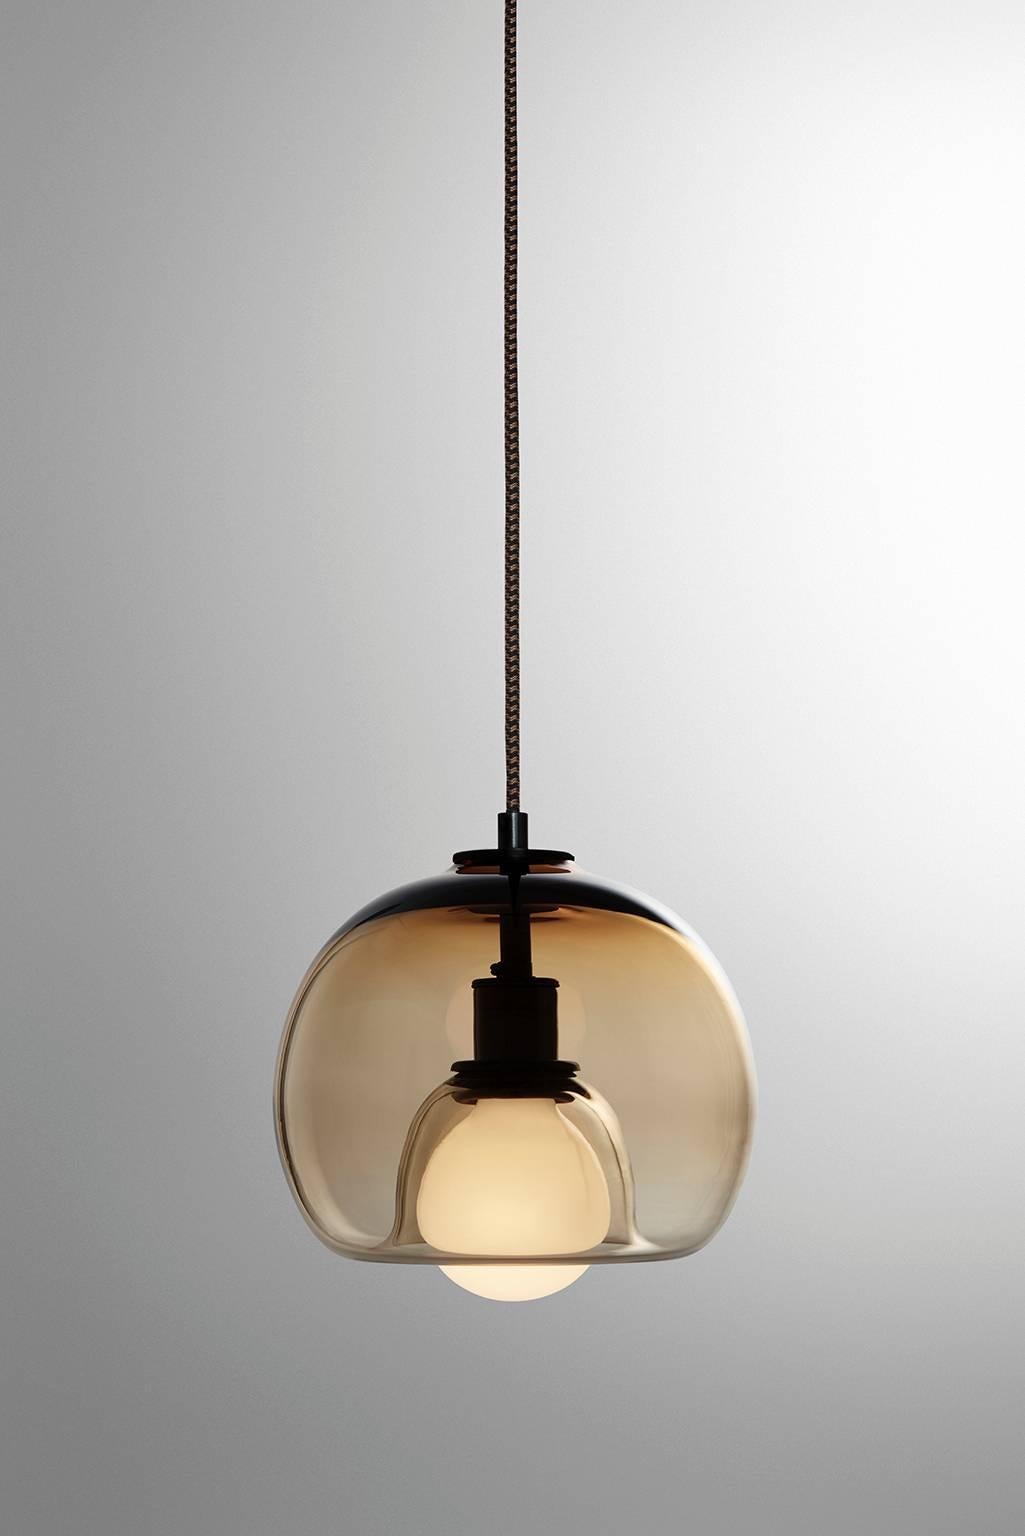 A handblown orb gracefully inverted to house a globe bulb, like a pearl encased in a glass oyster. The Eres bronze has an 8” diameter with a 4' black and brown houndstooth fabric-covered cord and a 4.75” diameter black porcelain canopy. Houses one